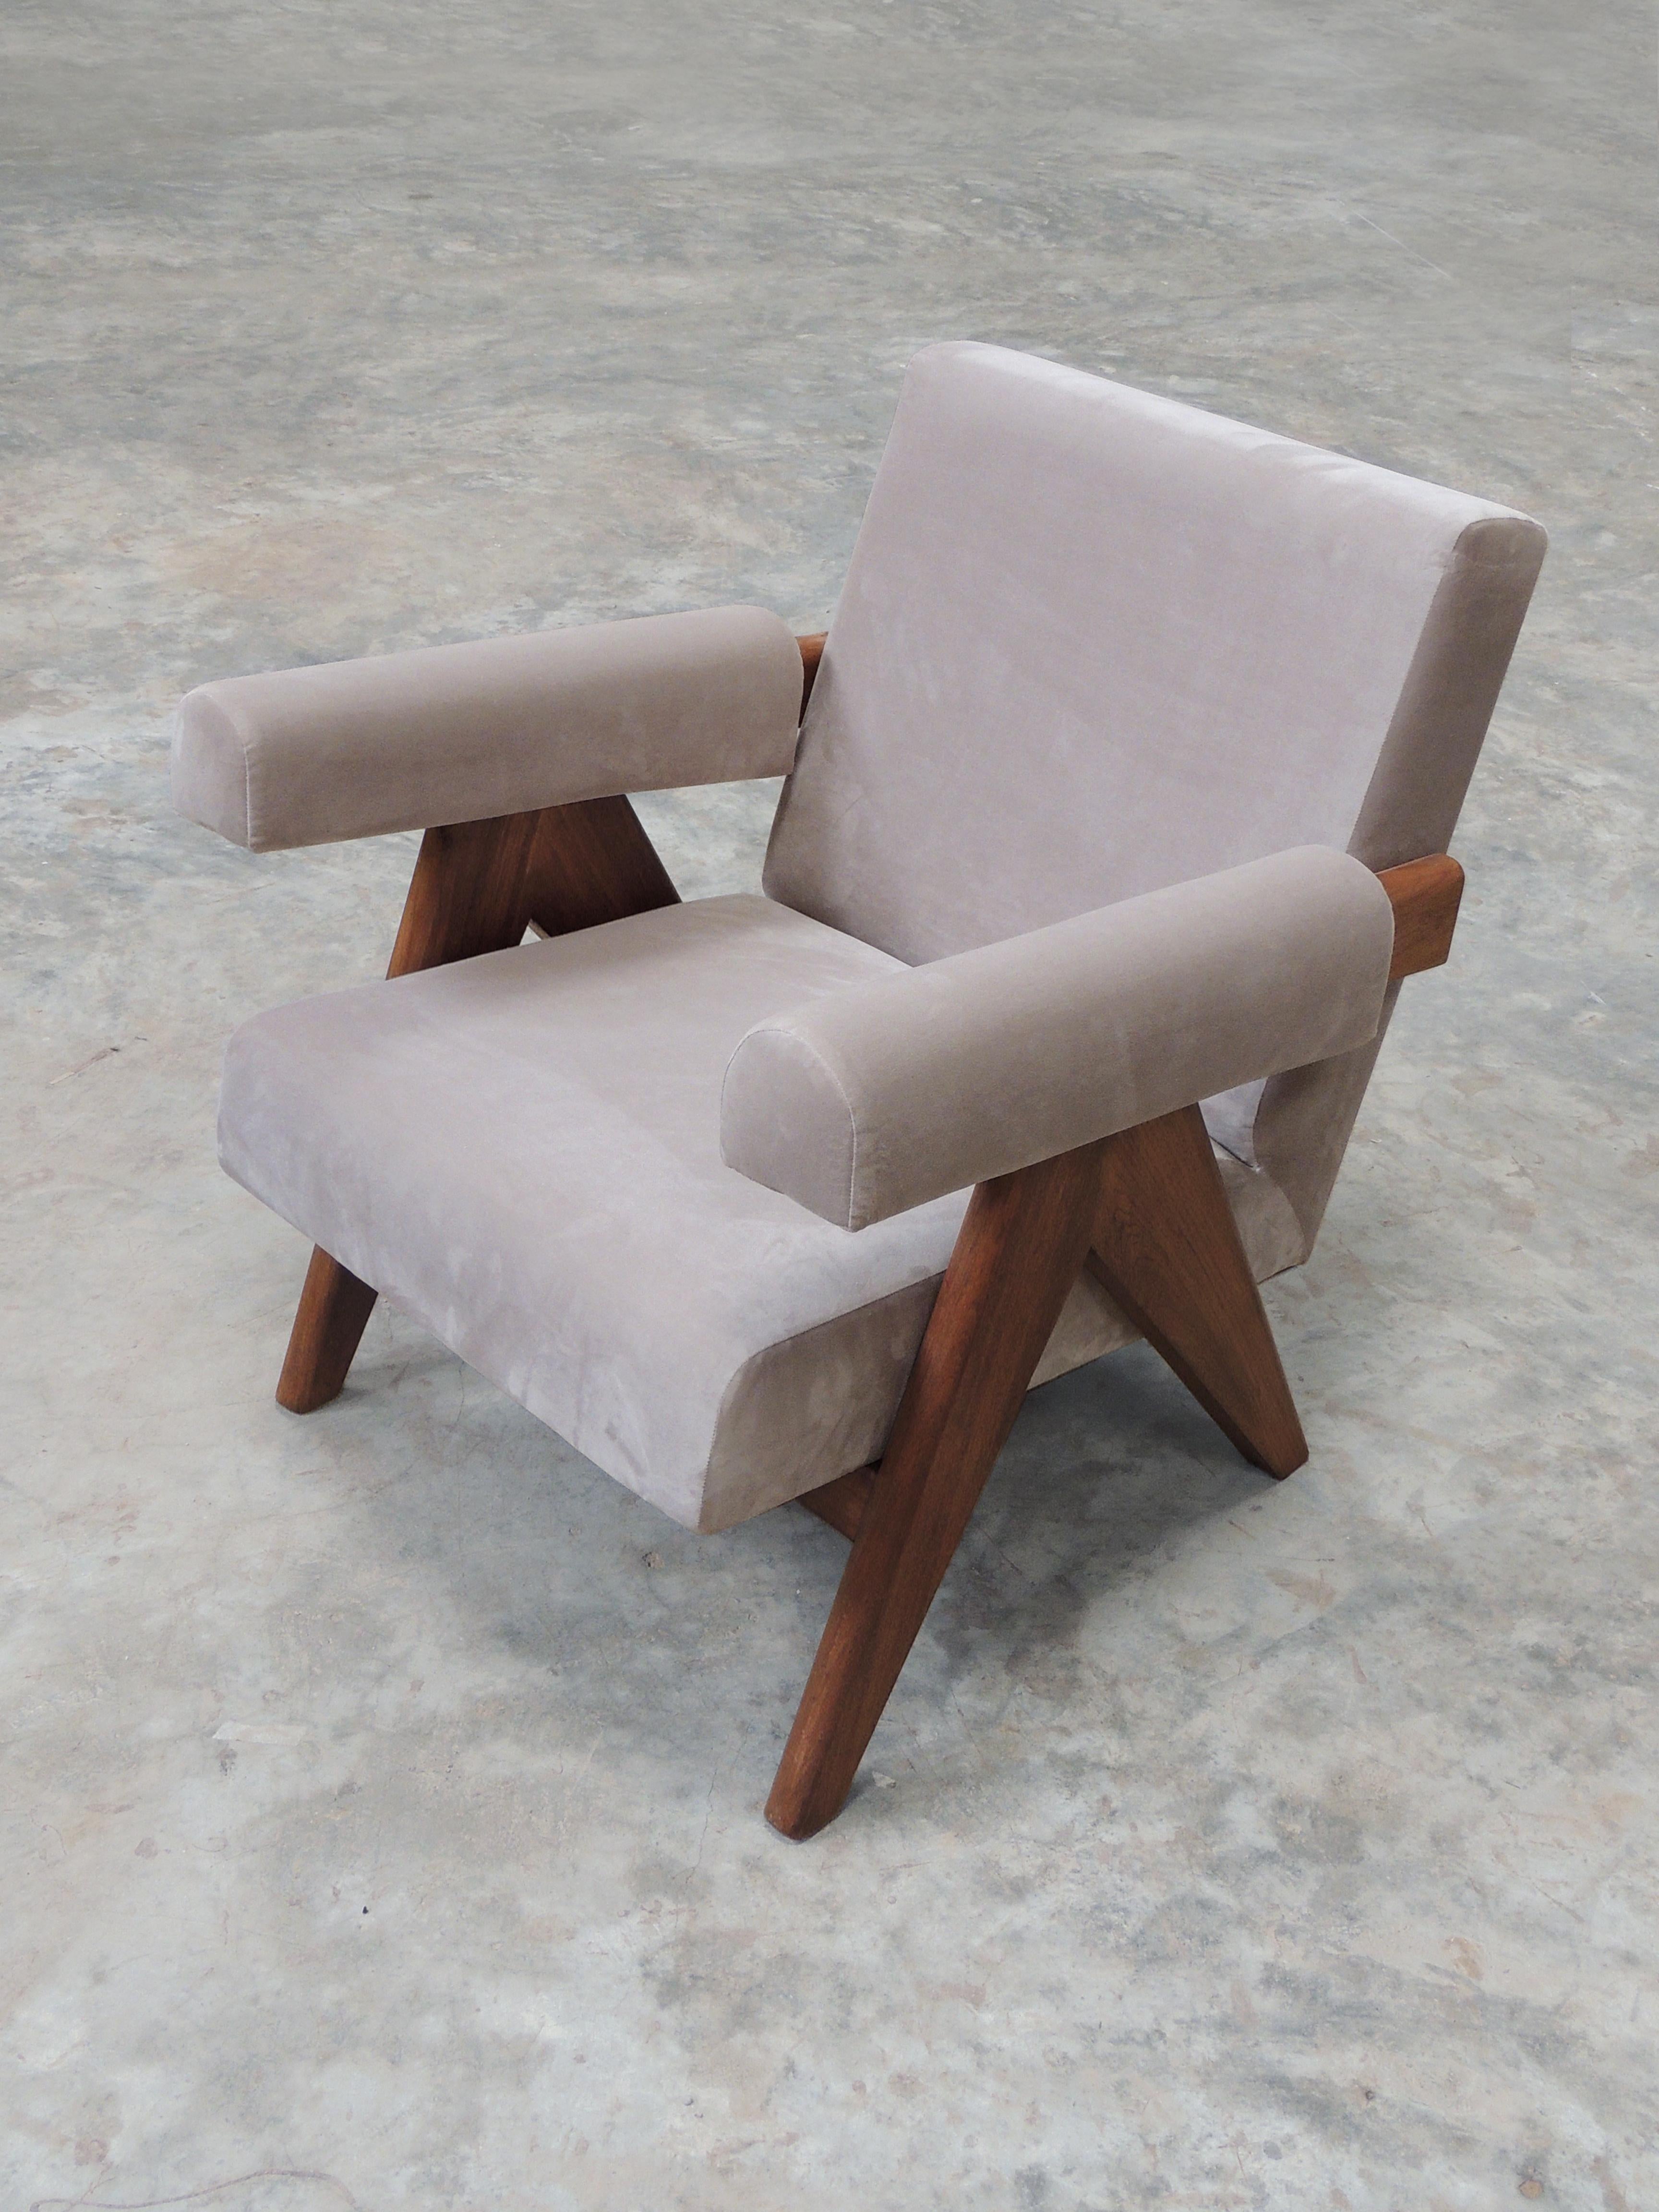 Pierre Jeanneret's upholstered armchair - hand-sculpted contemporary reedition

The upholstered easy armchair is a re-edition of the model created for building lobbies in Chandigarh in the 1950s. Our version is made with high quality fabric and we